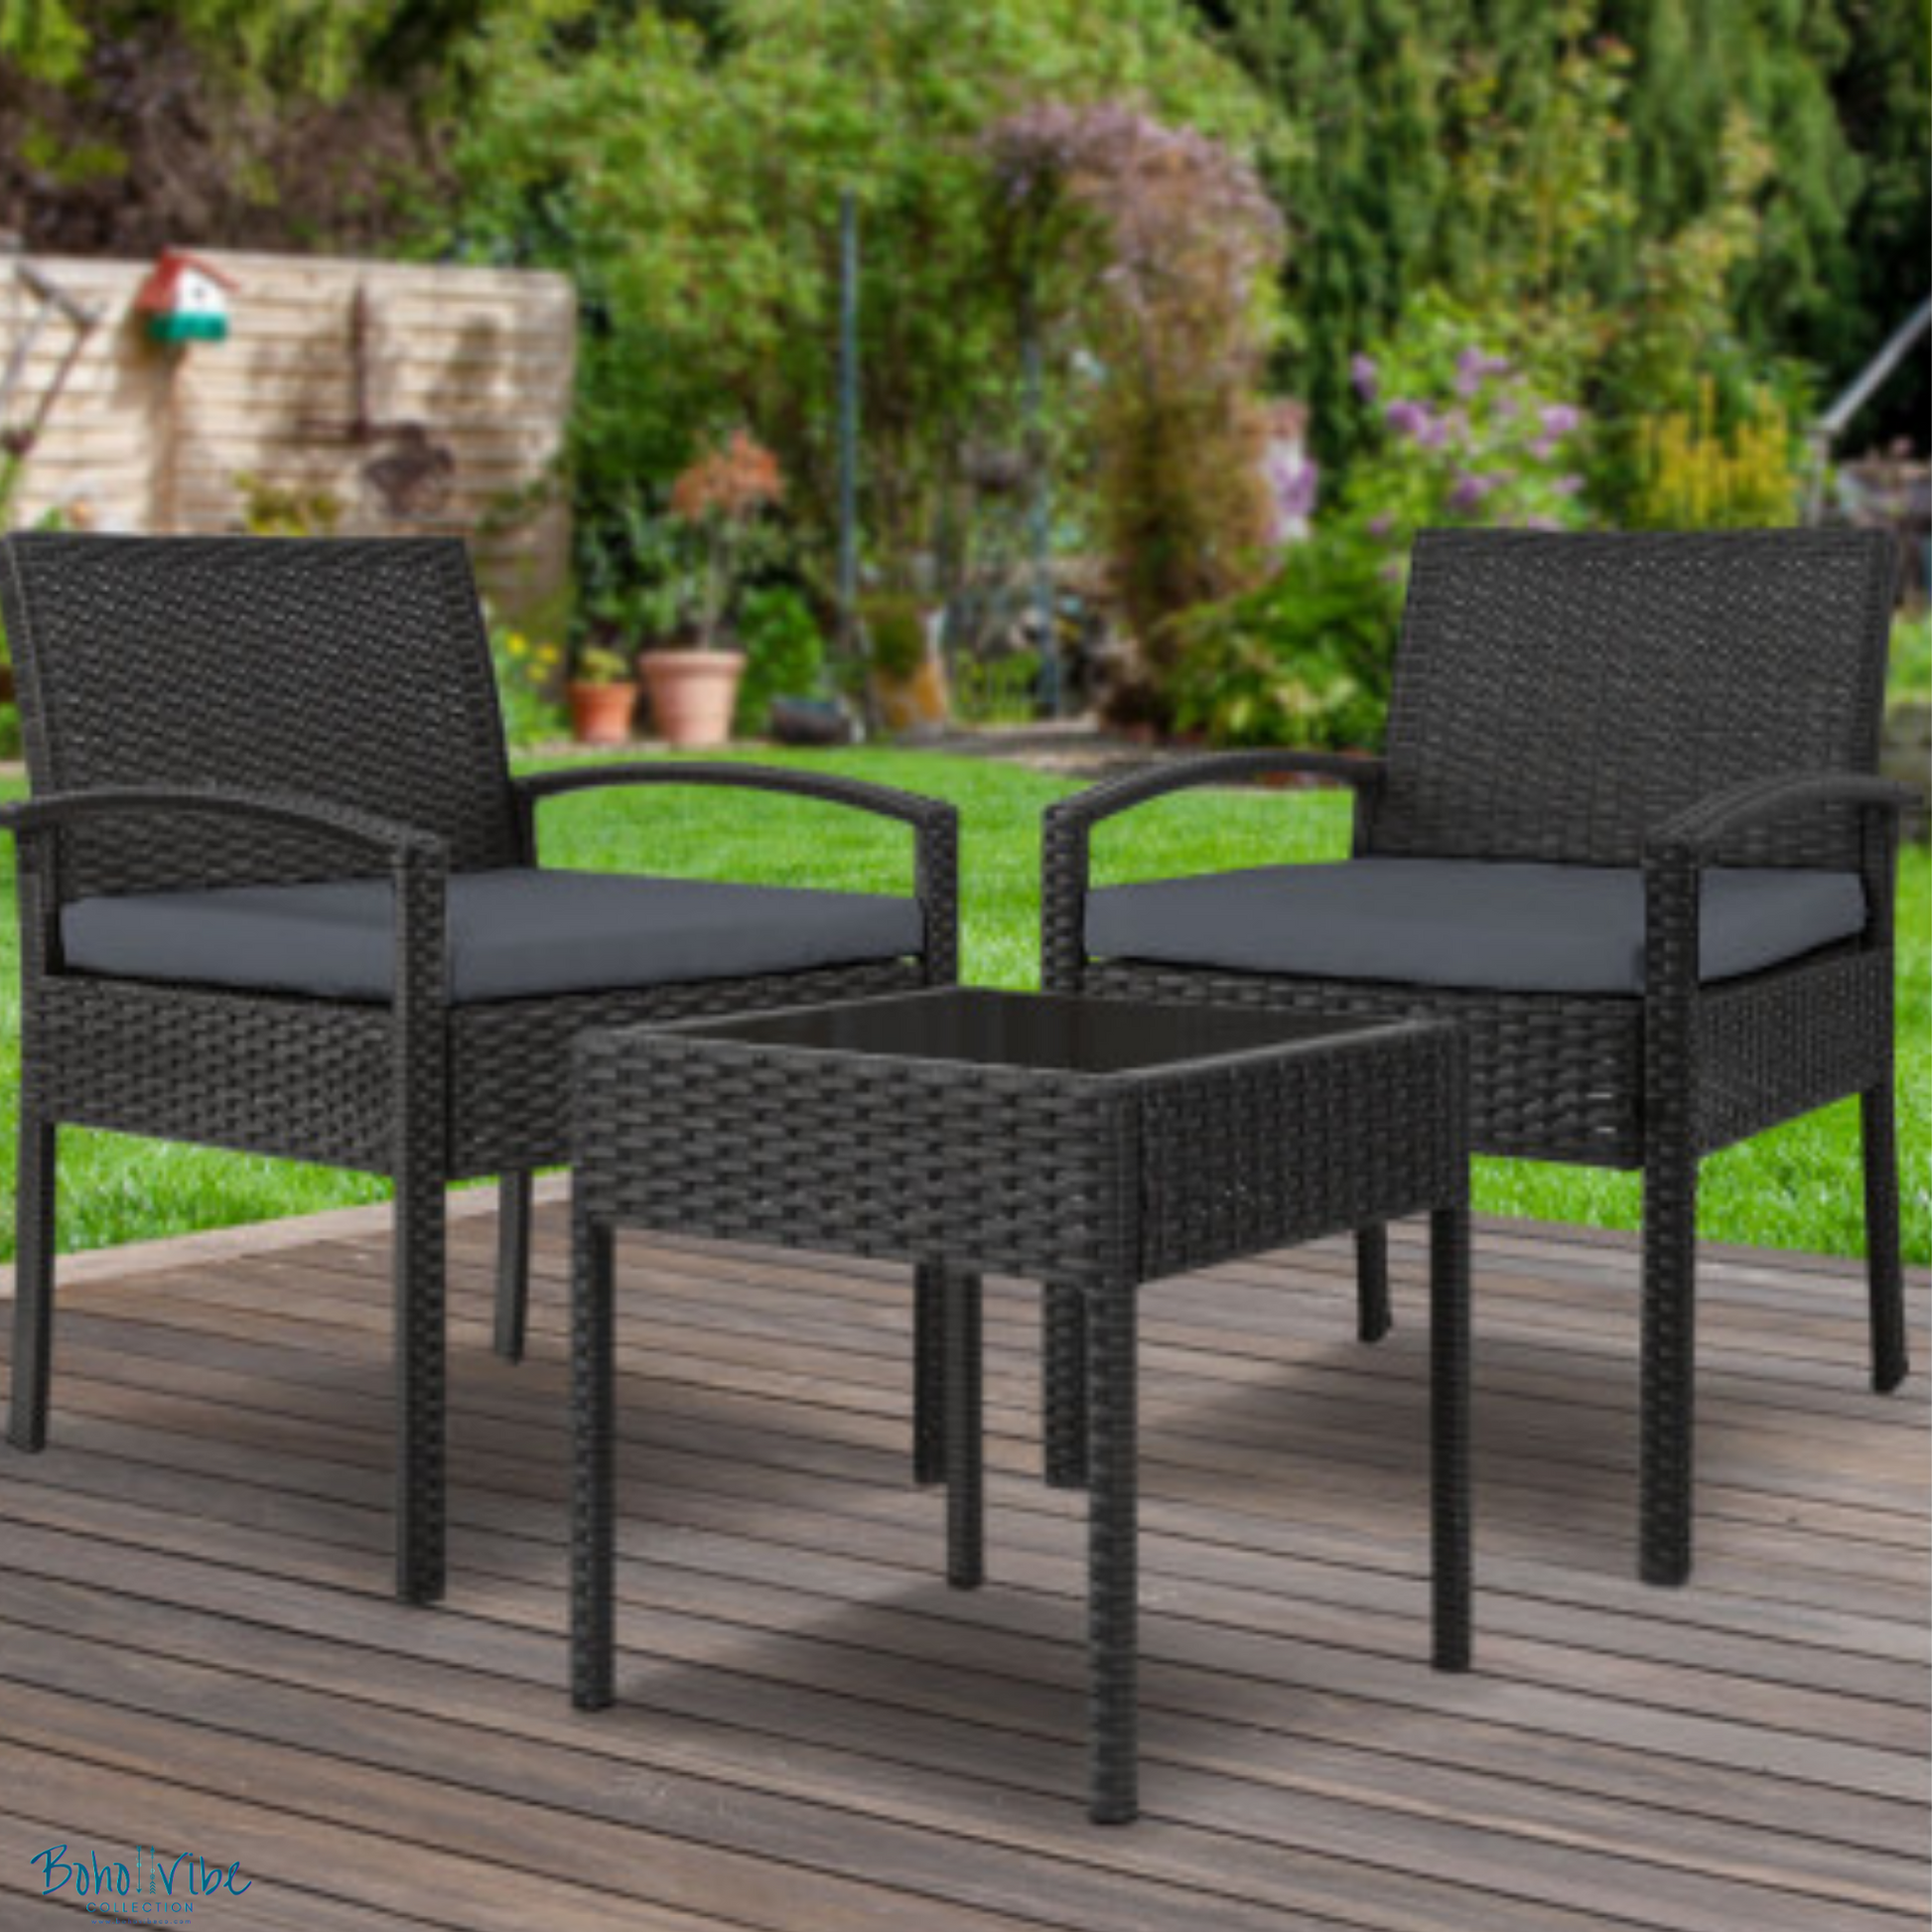 Boho ↡↟ Vibe Collection ↠ Black Wicker Coastal 3 Piece Outdoor Setting Boho Chairs & Table Furniture Set 